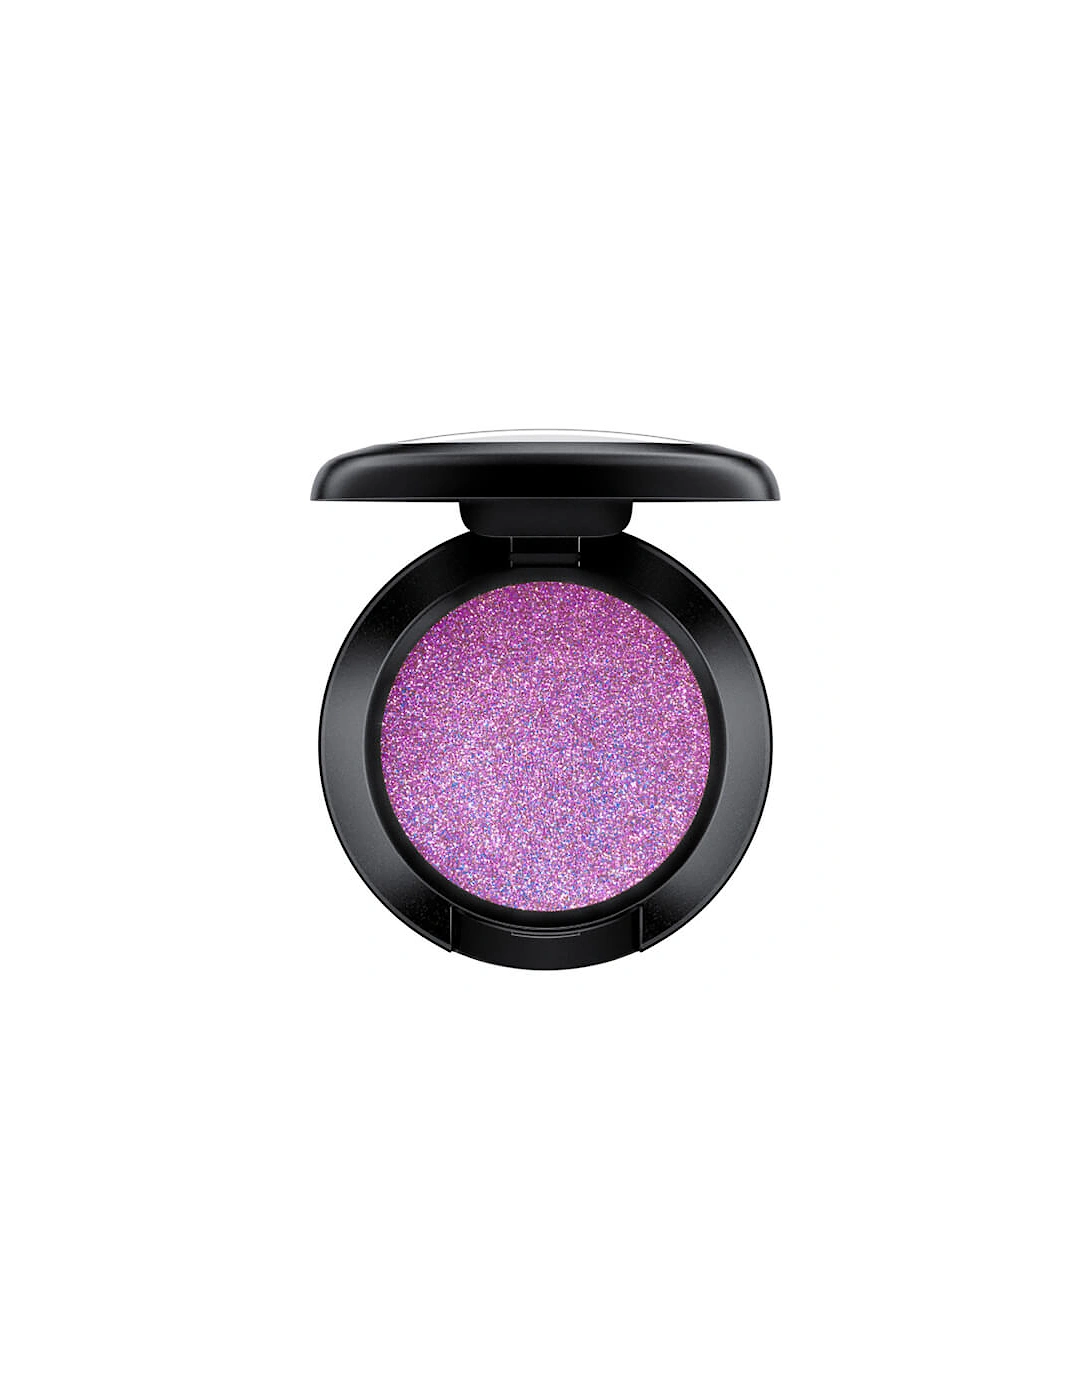 Pop Dazzleshadow Eye Shadow - Can't Stop Don't Stop, 2 of 1